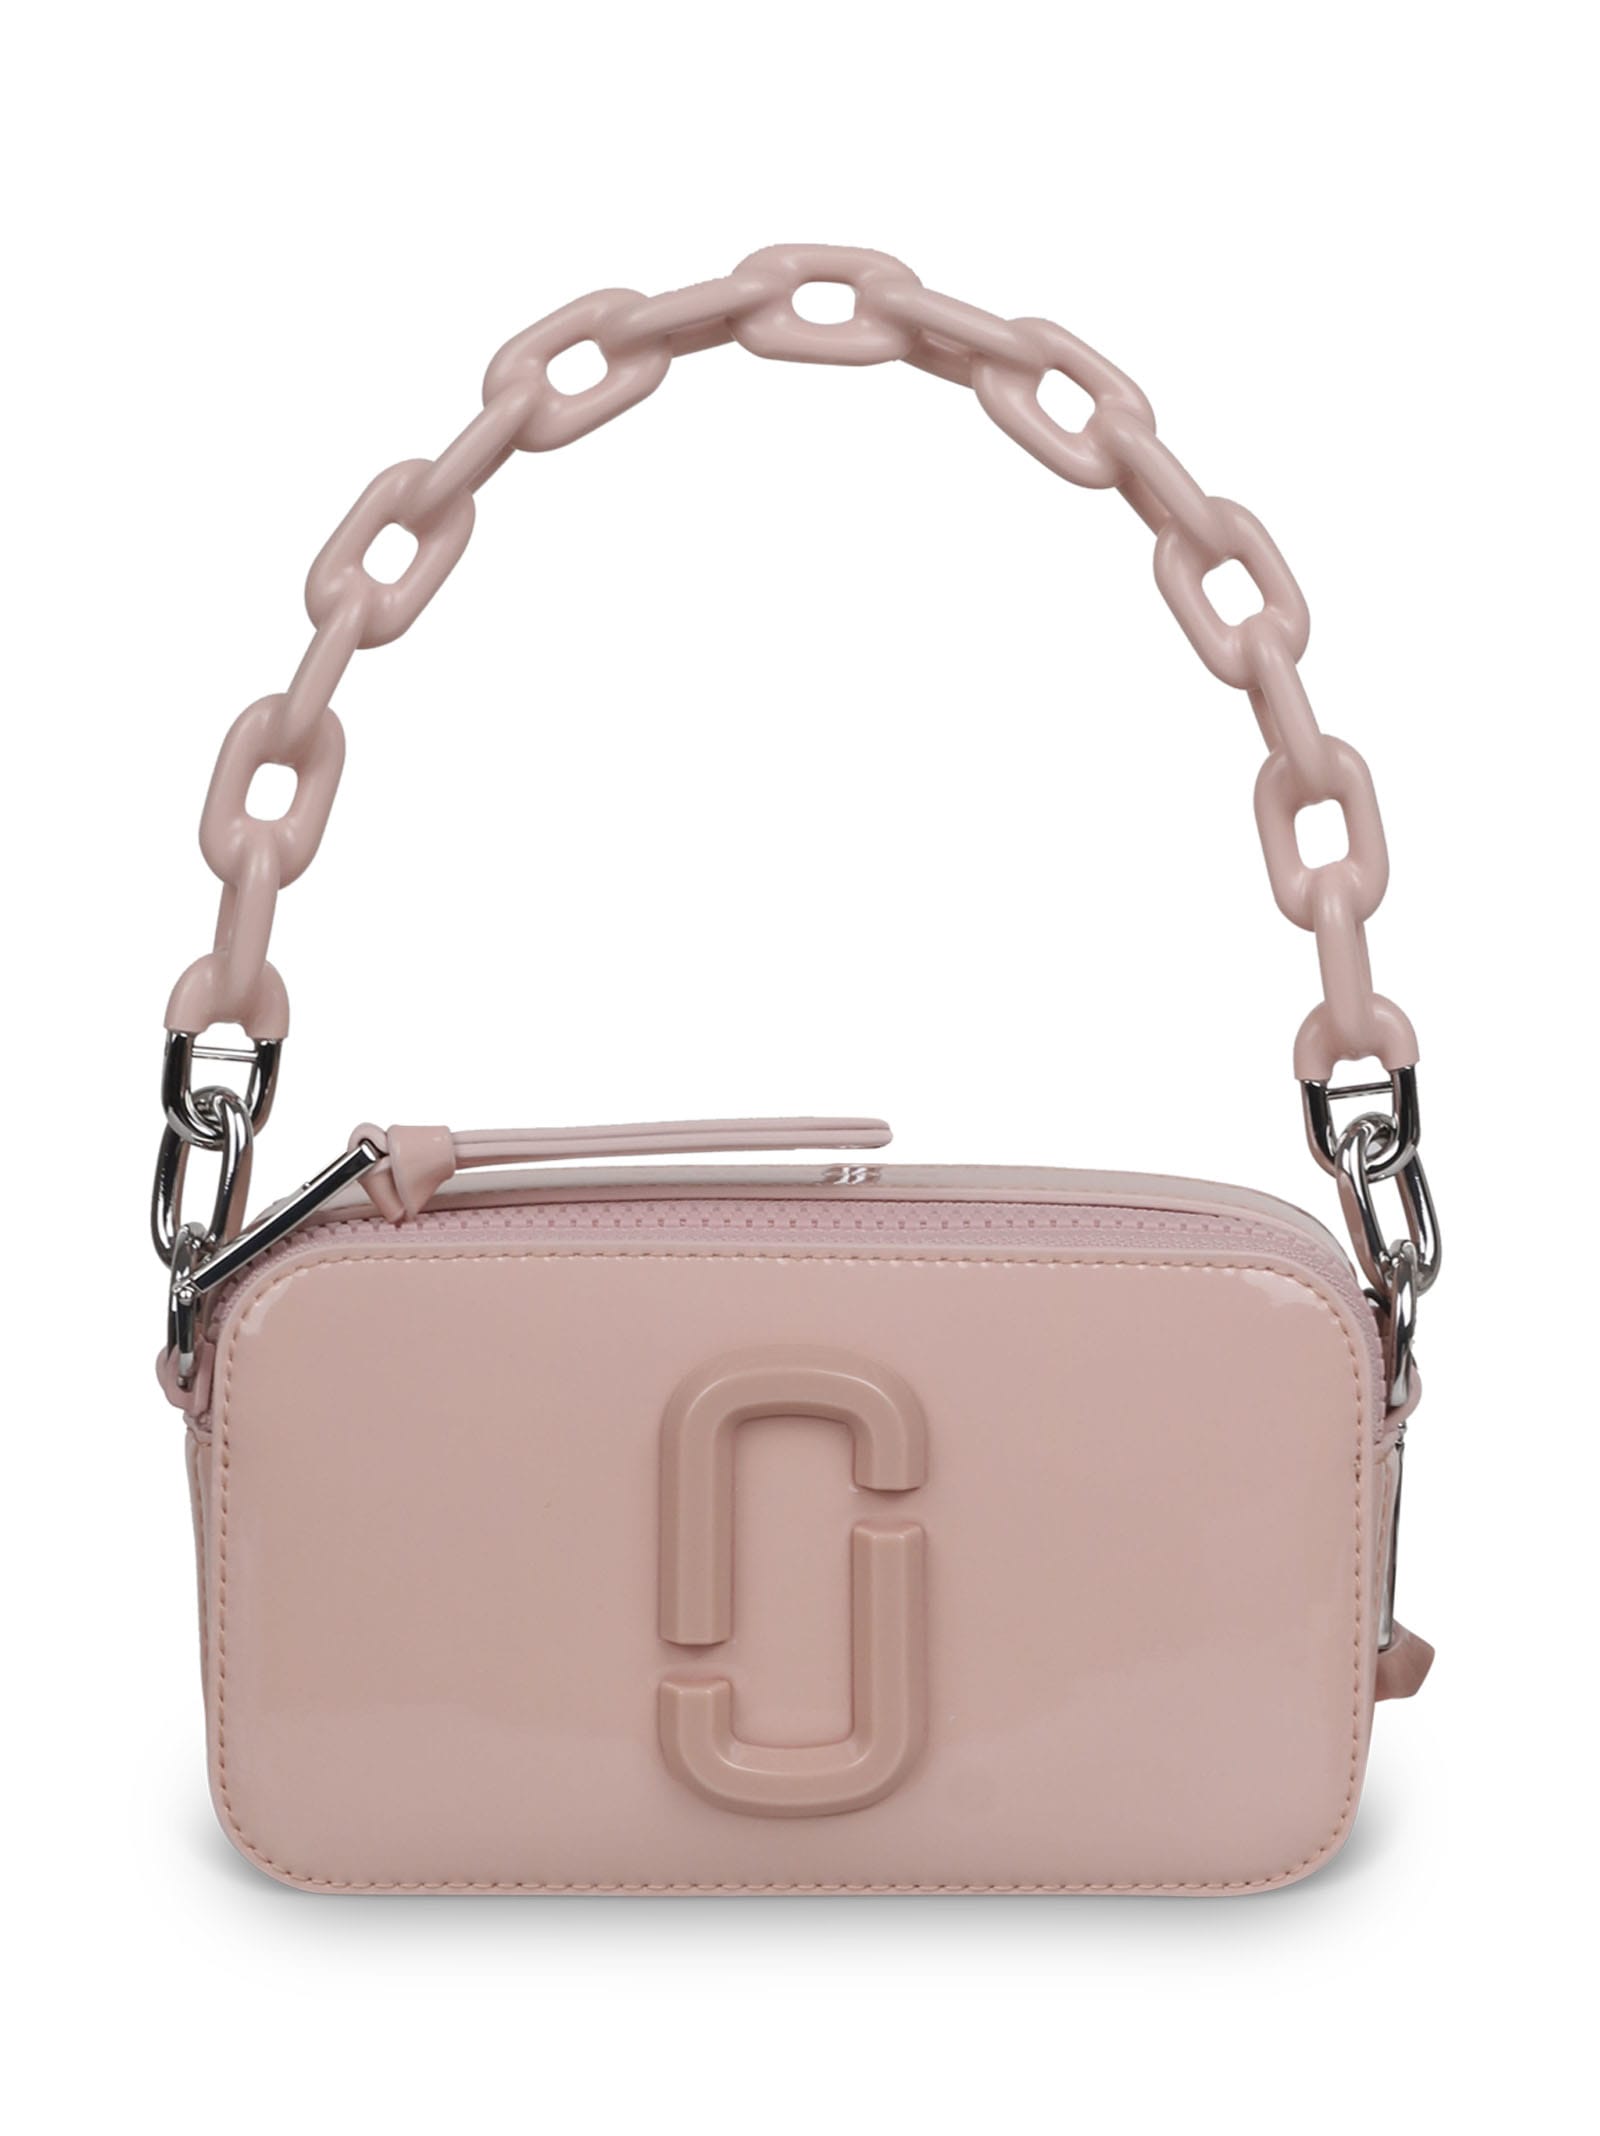 MARC JACOBS MARC JACOBS THE SNAPSHOT LEATHER CROSSBODY BAG